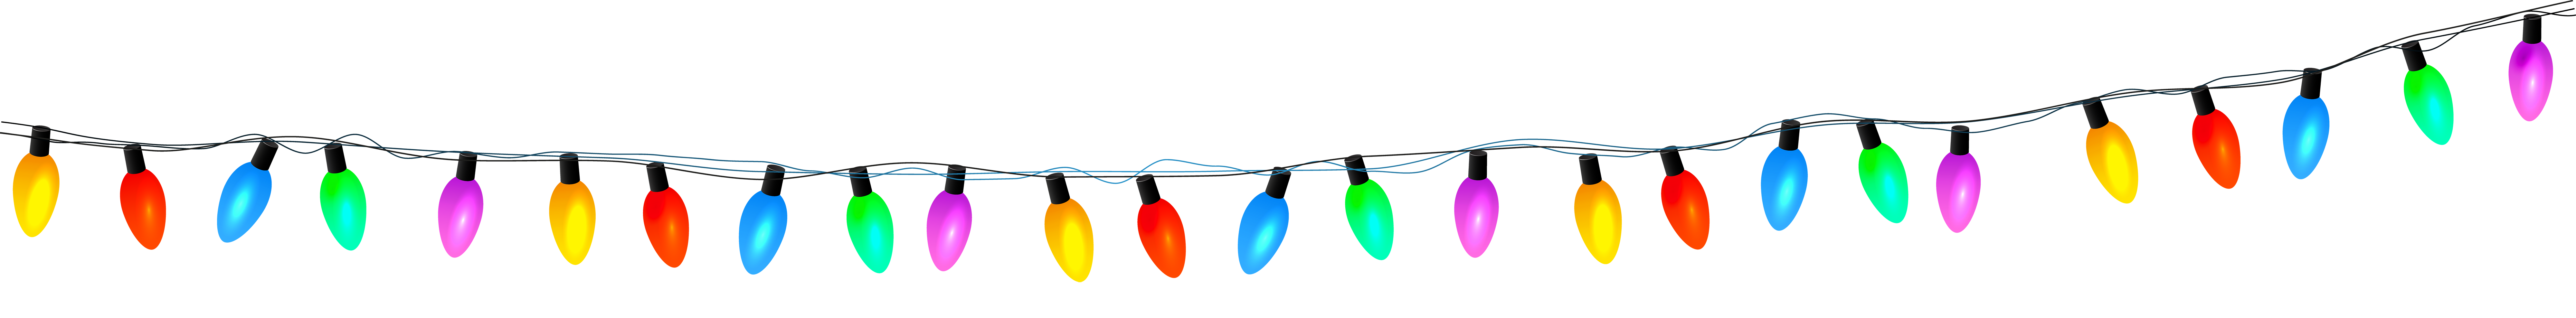 string christmas lights download clipart #40606